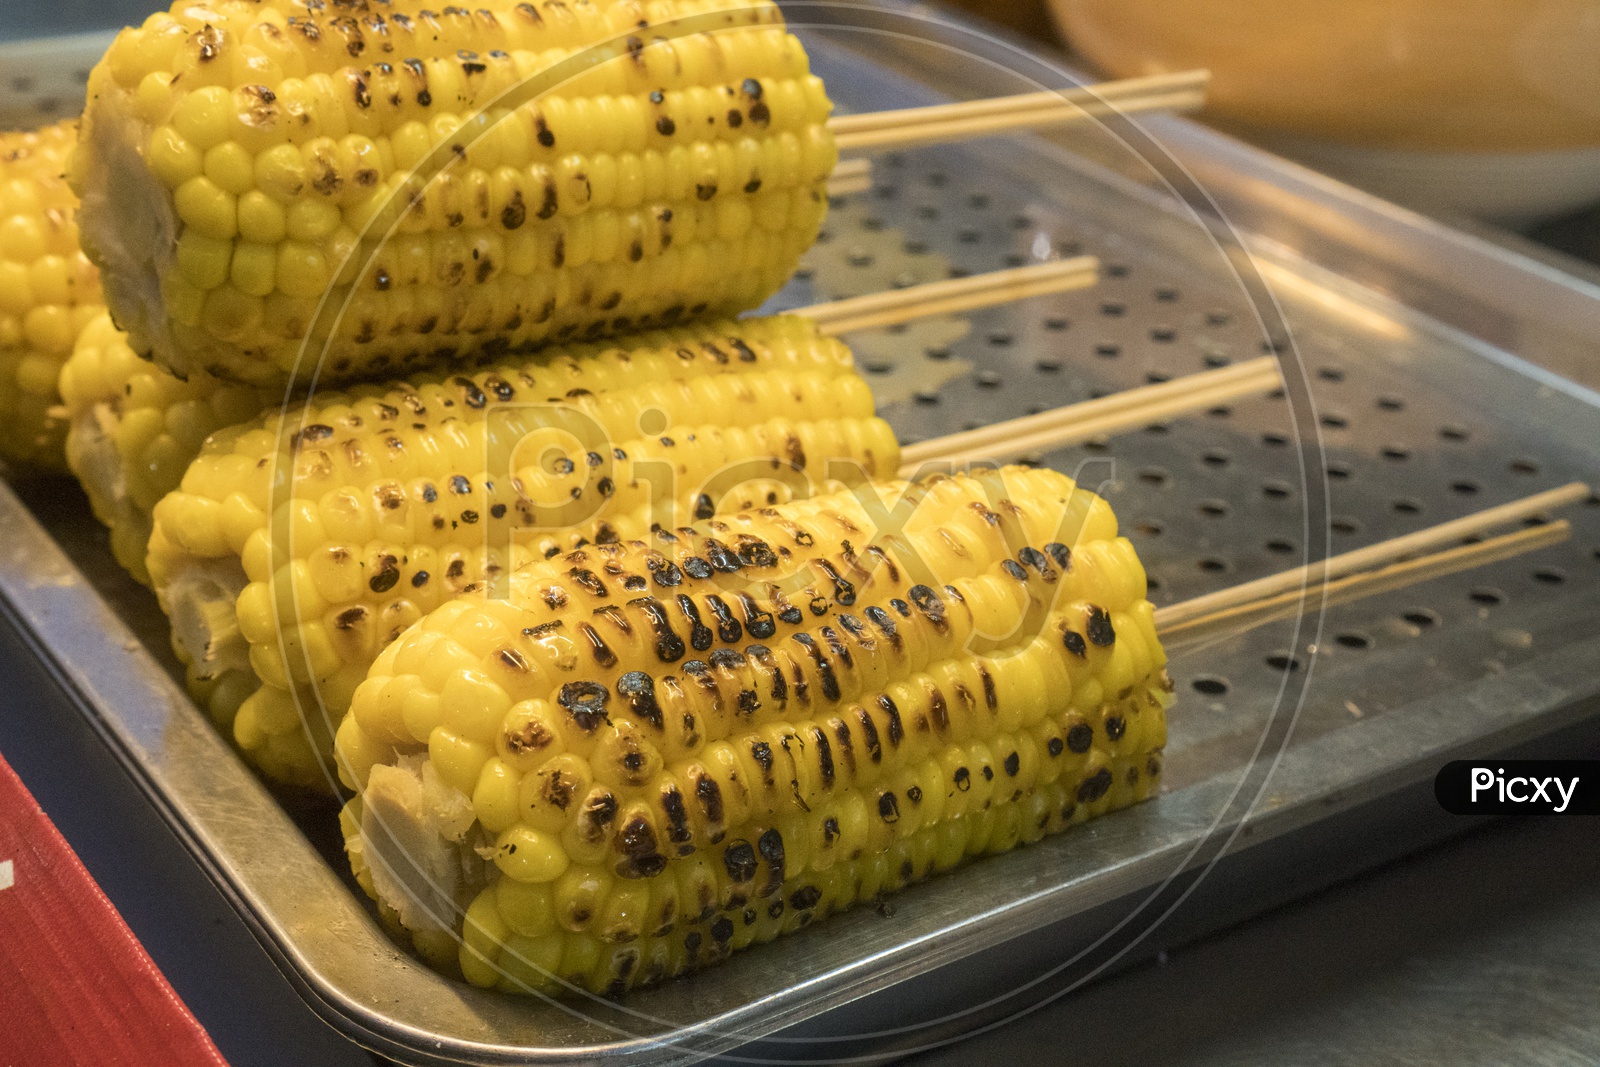 Sweet corn Grilled In a Street Food Vendor stall